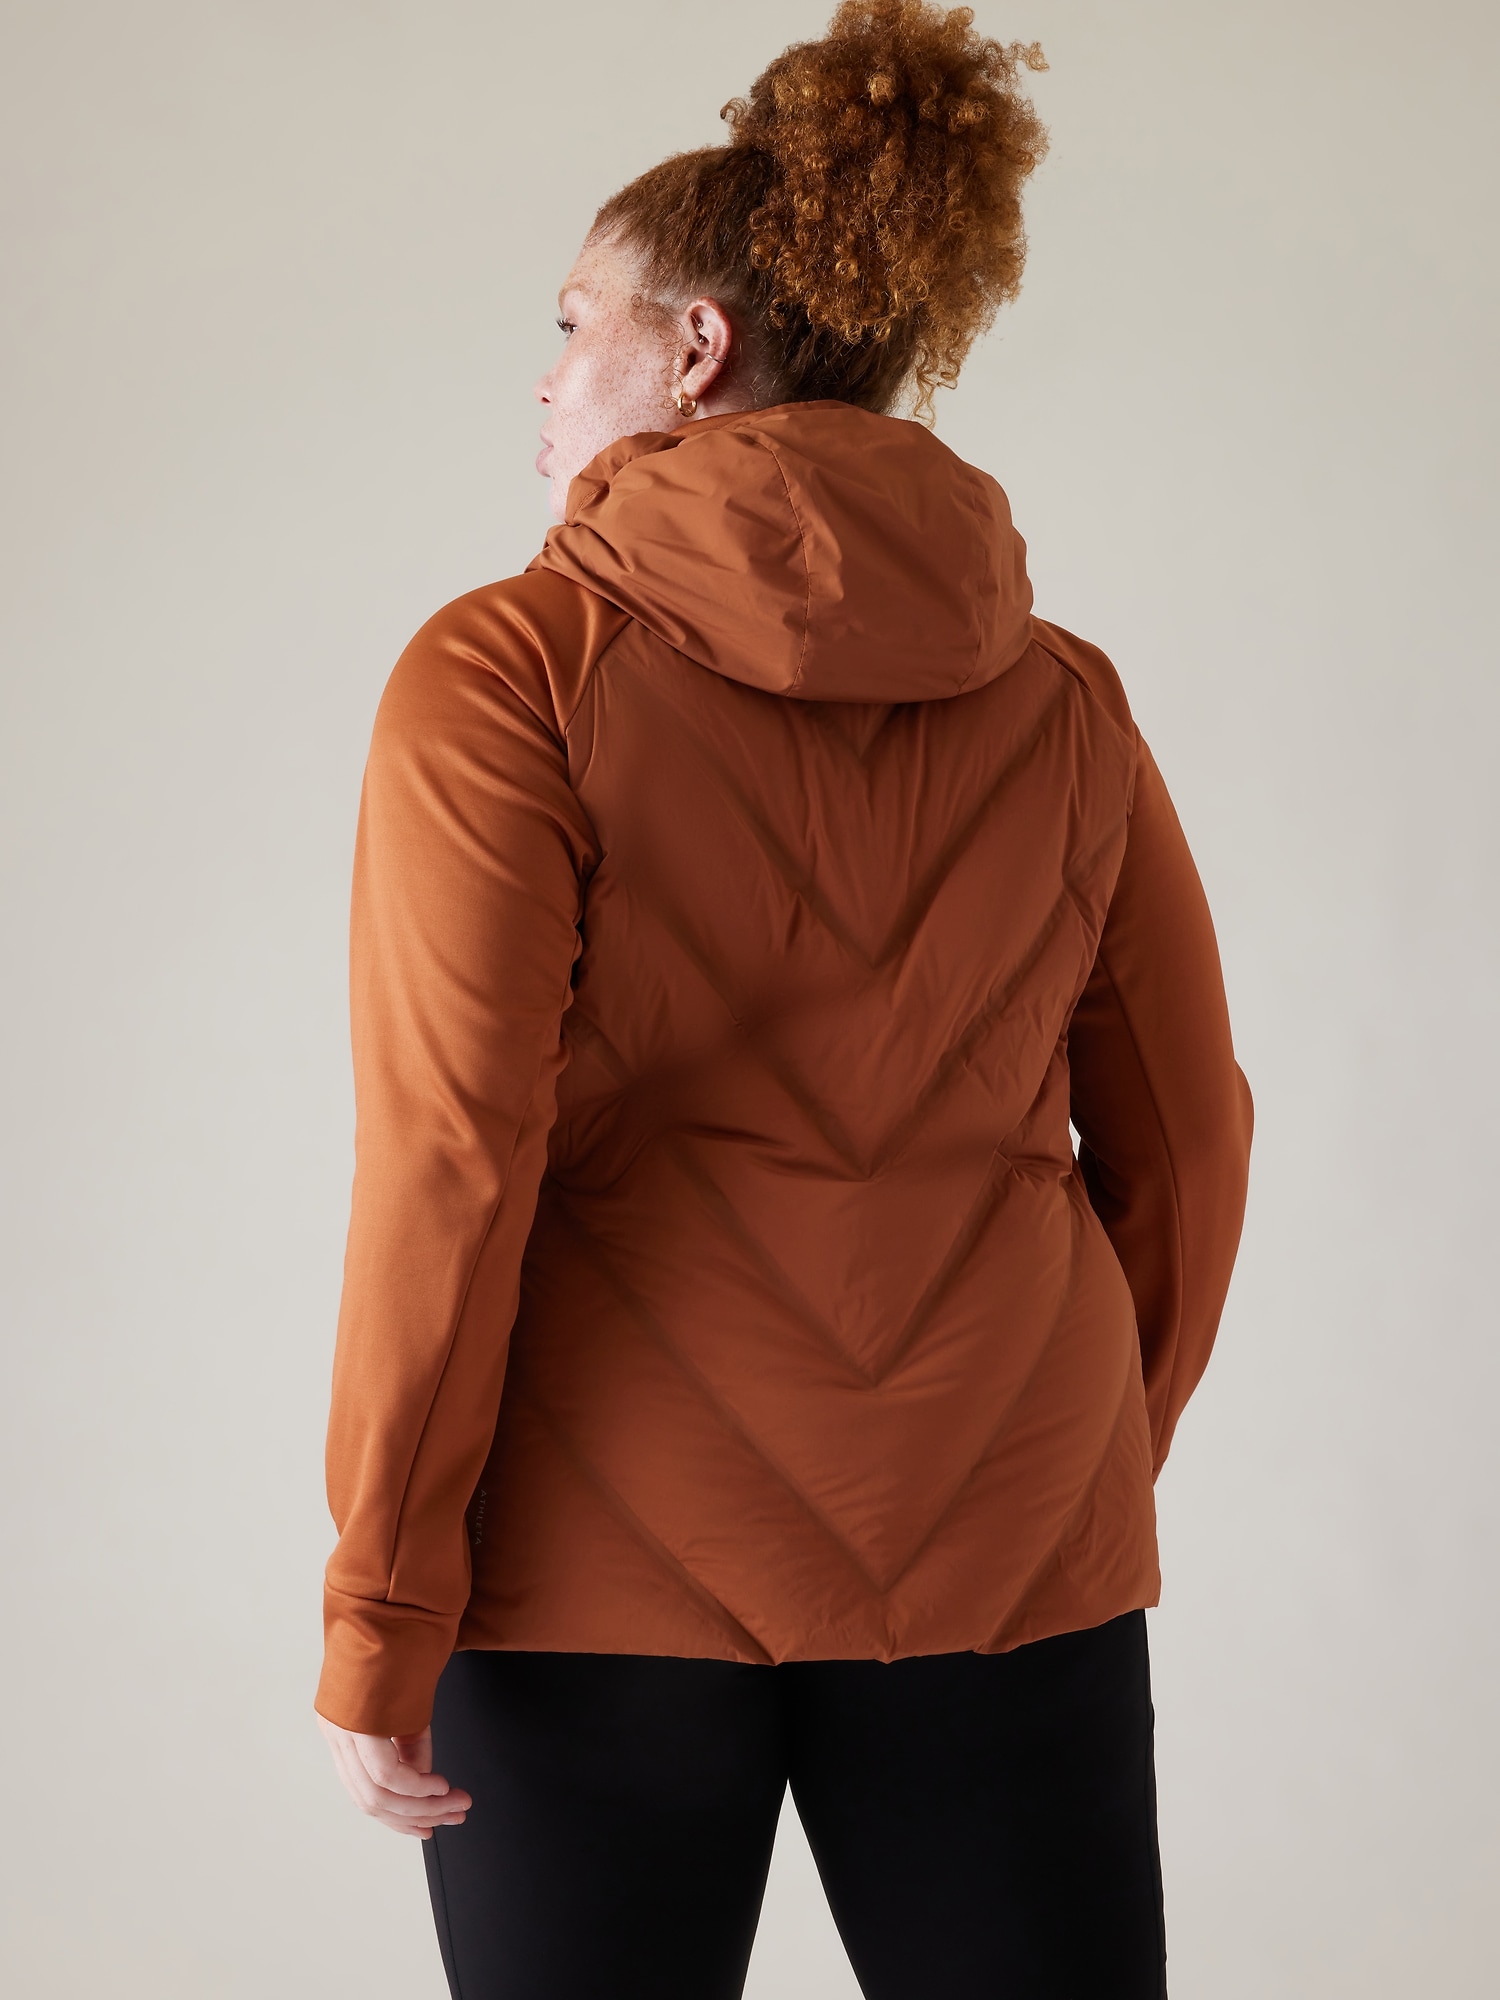 Lululemon Women's Down For It All Jacket-Various Color/Size-New